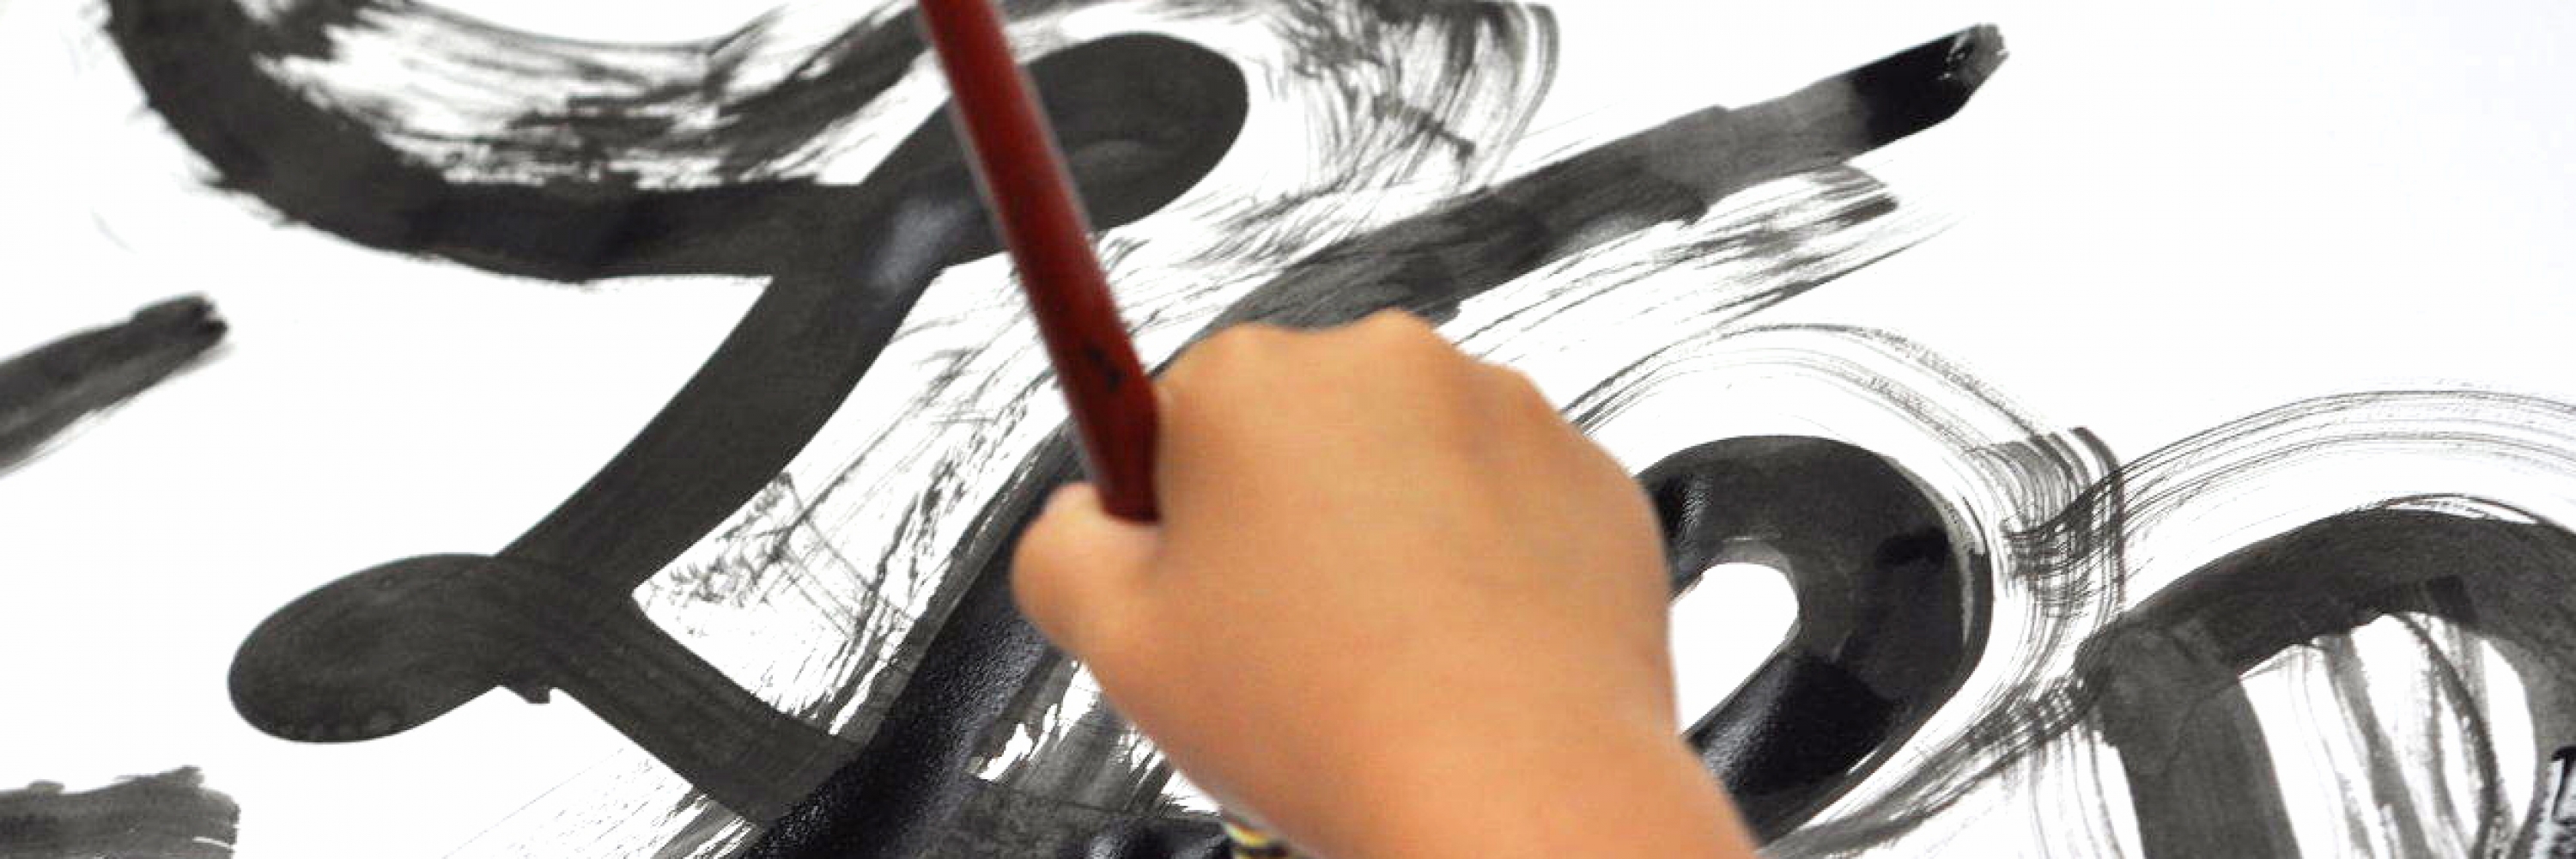 photo of a child's hand painting a black brush stroke